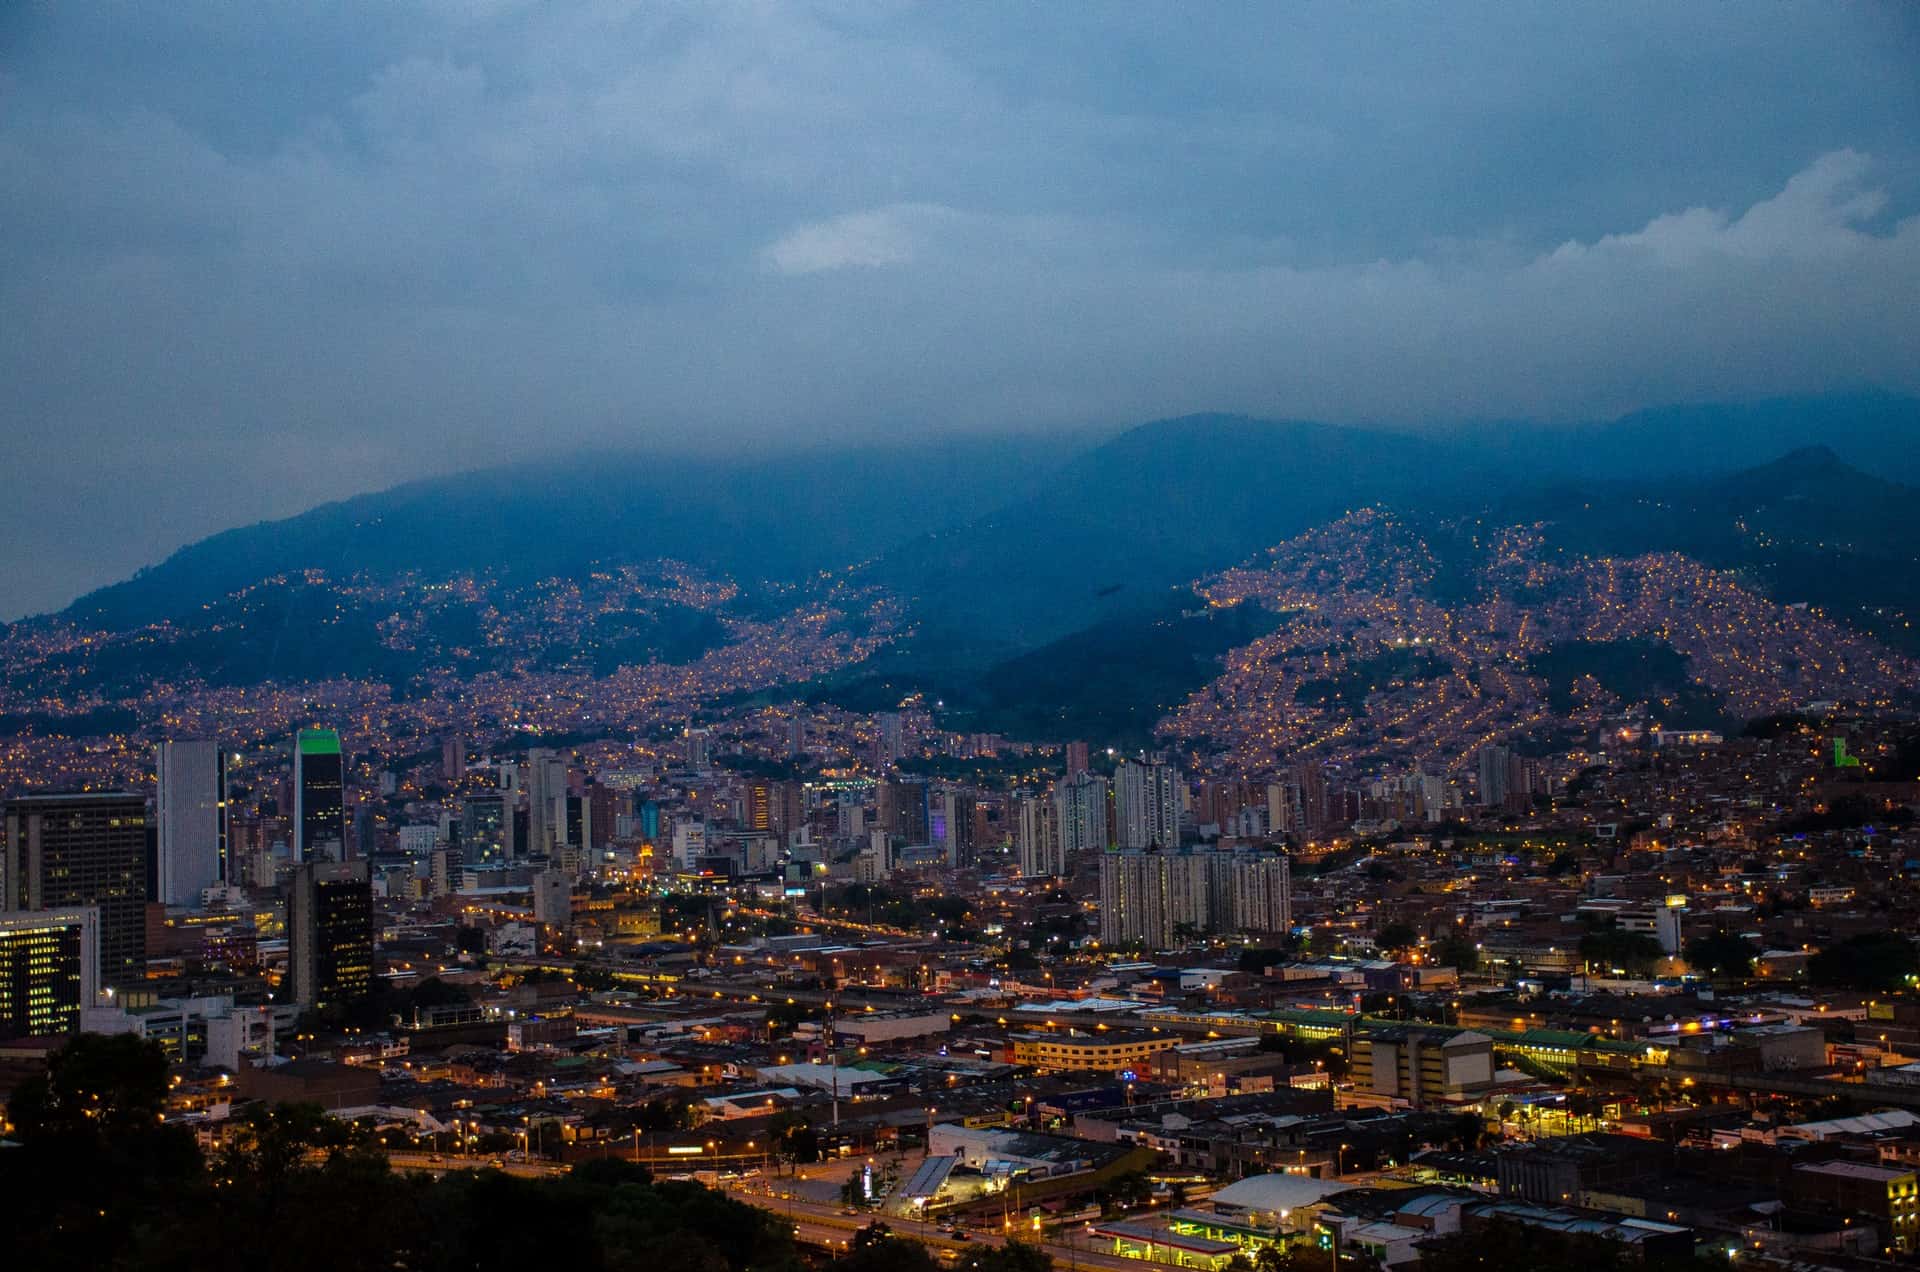 Best things to do in Medellin Colombia - Joseph Hogue - View of the city at night by Juan Saravia on Unsplash